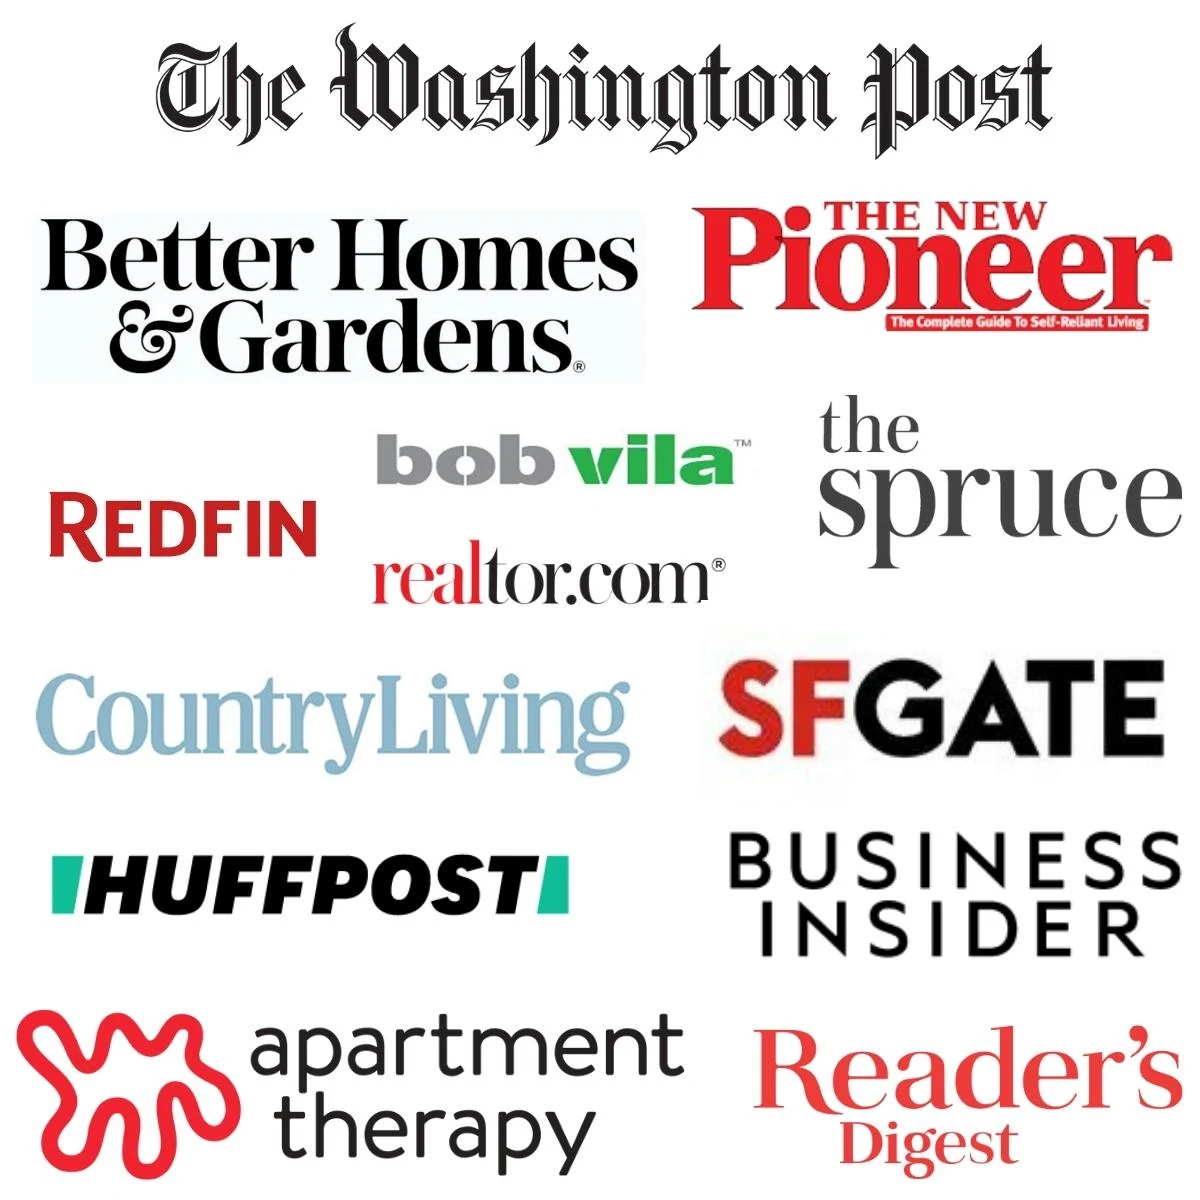 The Handyman's Daughter has been featured in The Washington Post, Better Homes and Gardens, The New Pioneer Magazine, Bob Vila, Redfin, Realtor.com, the Spruce, The San Francisco Gate, Country Living Magazine, Huffington Post, Business Insider, Apartment Therapy and Reader's Digest